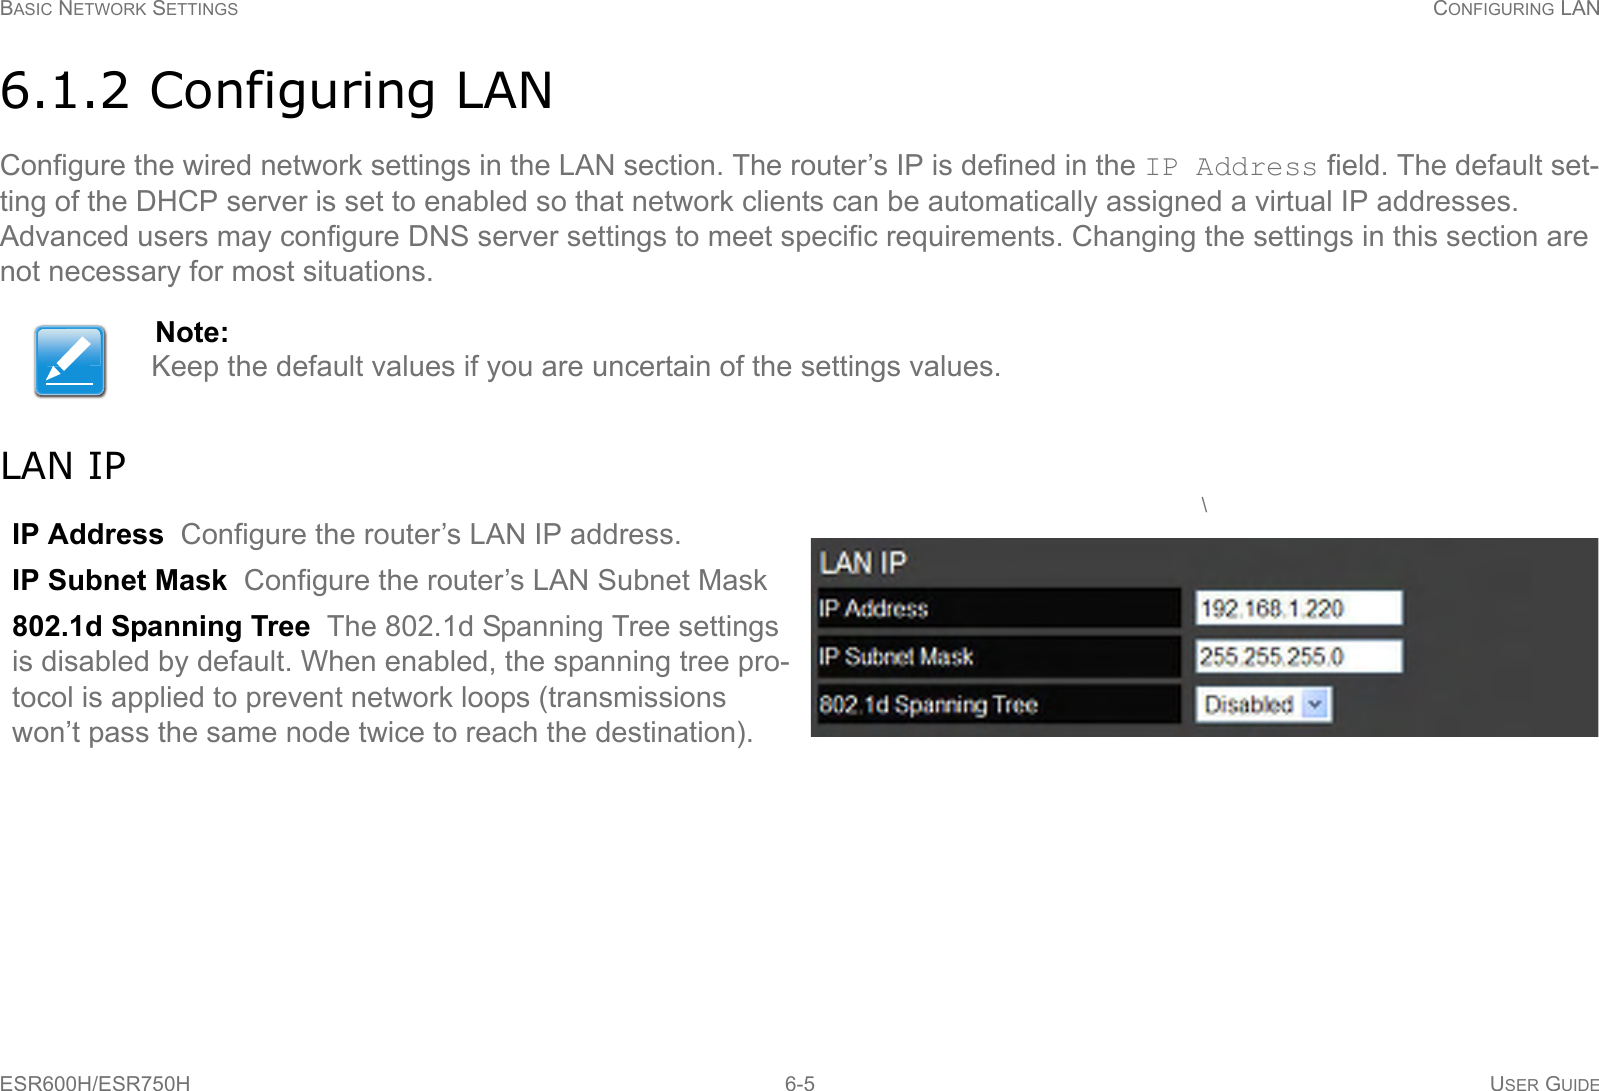 BASIC NETWORK SETTINGS CONFIGURING LANESR600H/ESR750H 6-5 USER GUIDE6.1.2 Configuring LANConfigure the wired network settings in the LAN section. The router’s IP is defined in the IP Address field. The default set-ting of the DHCP server is set to enabled so that network clients can be automatically assigned a virtual IP addresses. Advanced users may configure DNS server settings to meet specific requirements. Changing the settings in this section are not necessary for most situations.LAN IPNote:Keep the default values if you are uncertain of the settings values.IP Address  Configure the router’s LAN IP address.IP Subnet Mask  Configure the router’s LAN Subnet Mask802.1d Spanning Tree  The 802.1d Spanning Tree settings is disabled by default. When enabled, the spanning tree pro-tocol is applied to prevent network loops (transmissions won’t pass the same node twice to reach the destination). \